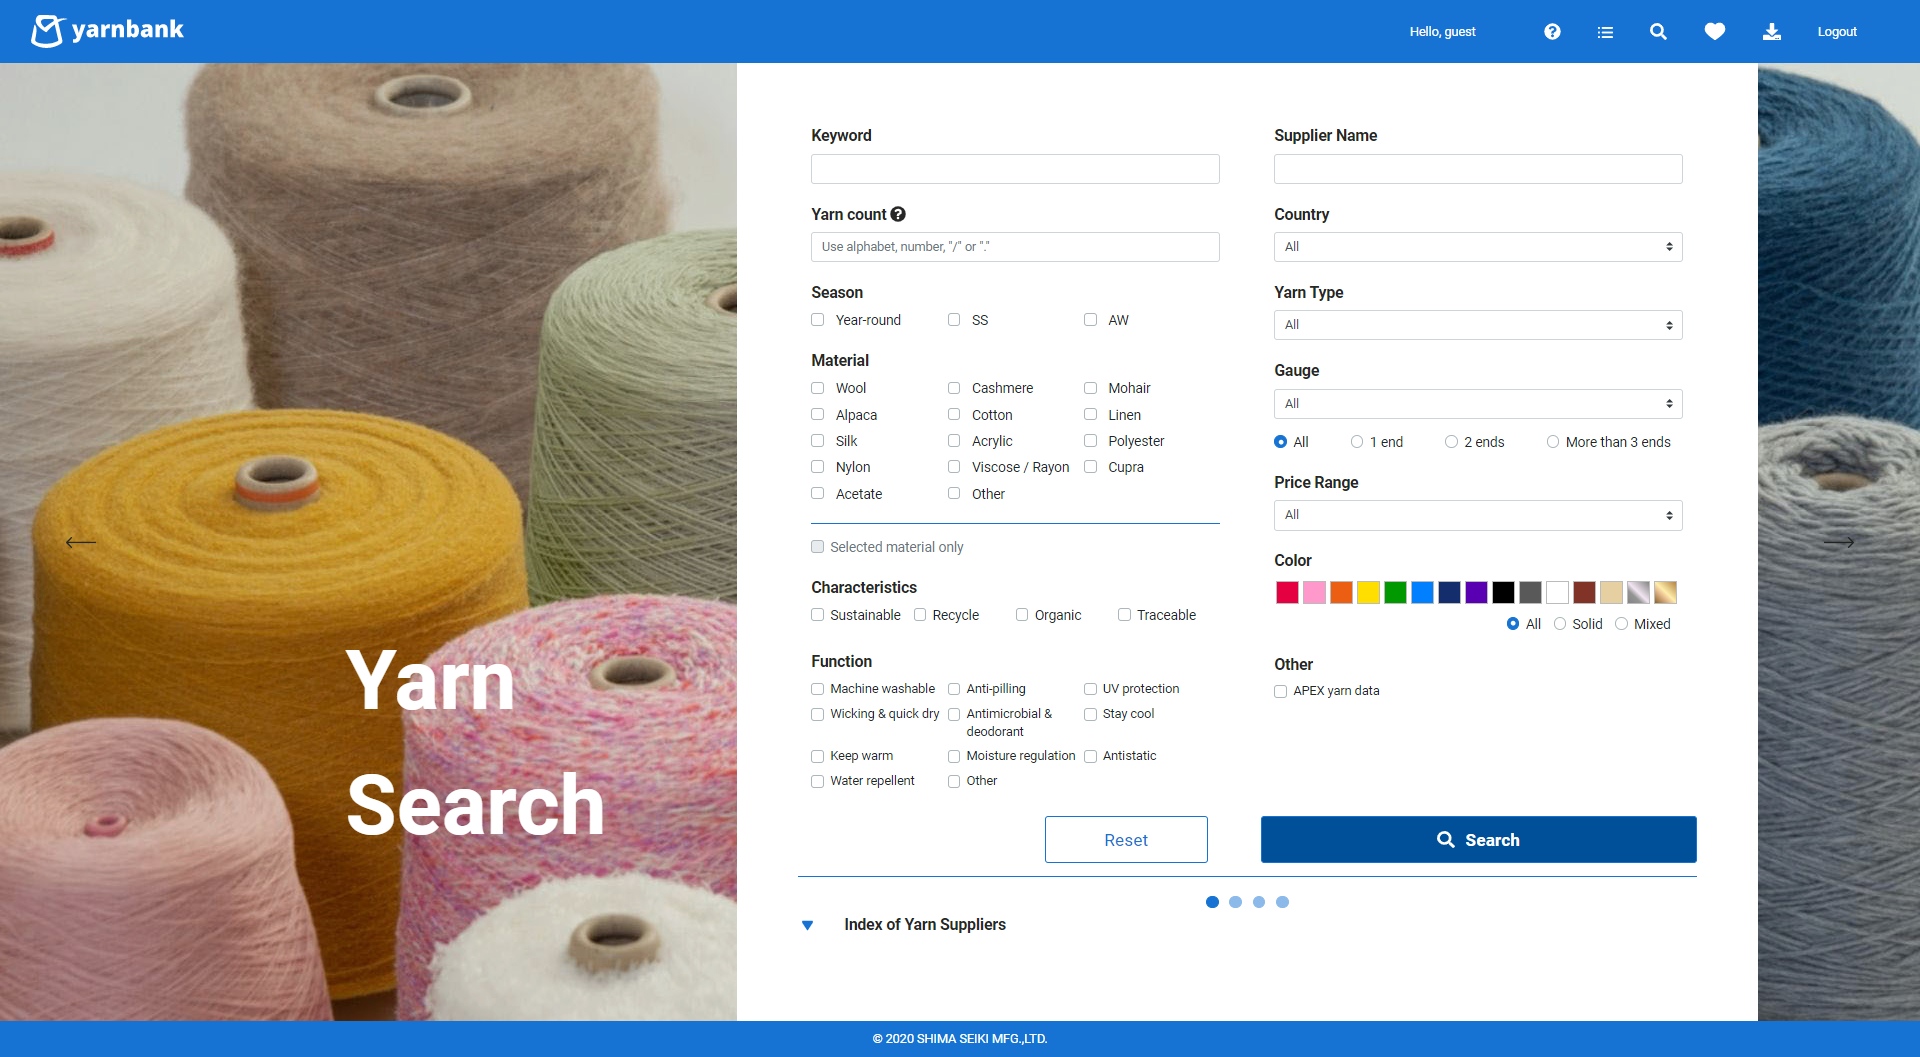 With yarnbank, the entire supply chain from yarn companies and apparel companies to knit manufacturers can be connected digitally. © Shima Seiki.